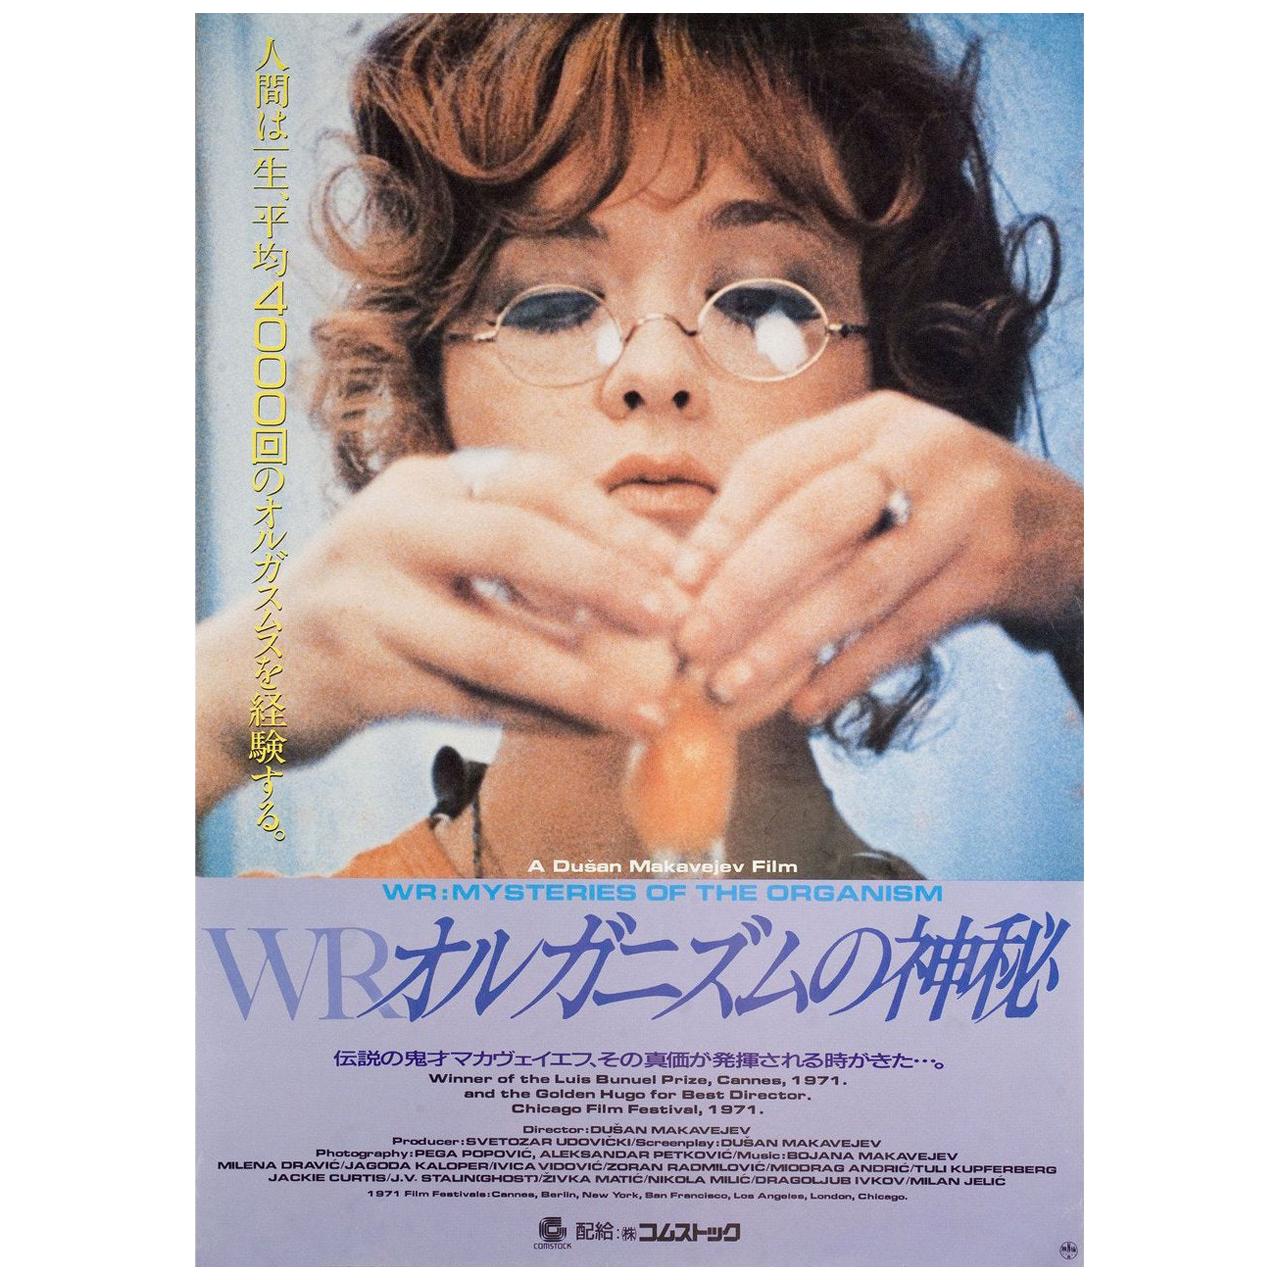 'WR: Mysteries of the Organism' 1988 Japanese B2 Film Poster